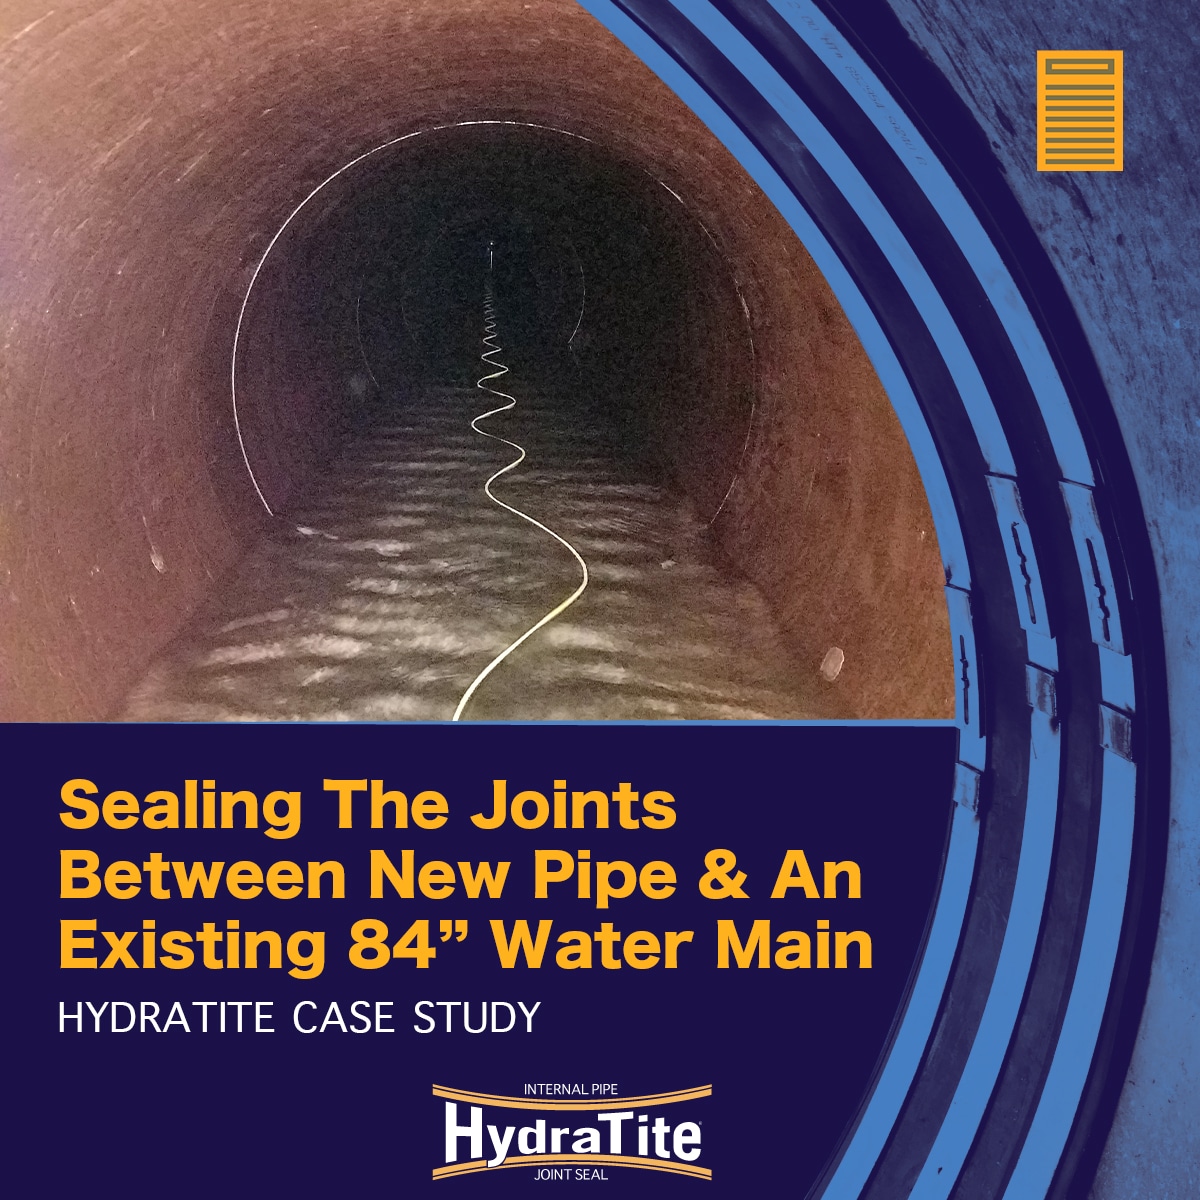 Teaser Image of a pipe that has exposed joints, 'Sealing The Joints Between New Pipes & An Existing 84" Water Main'